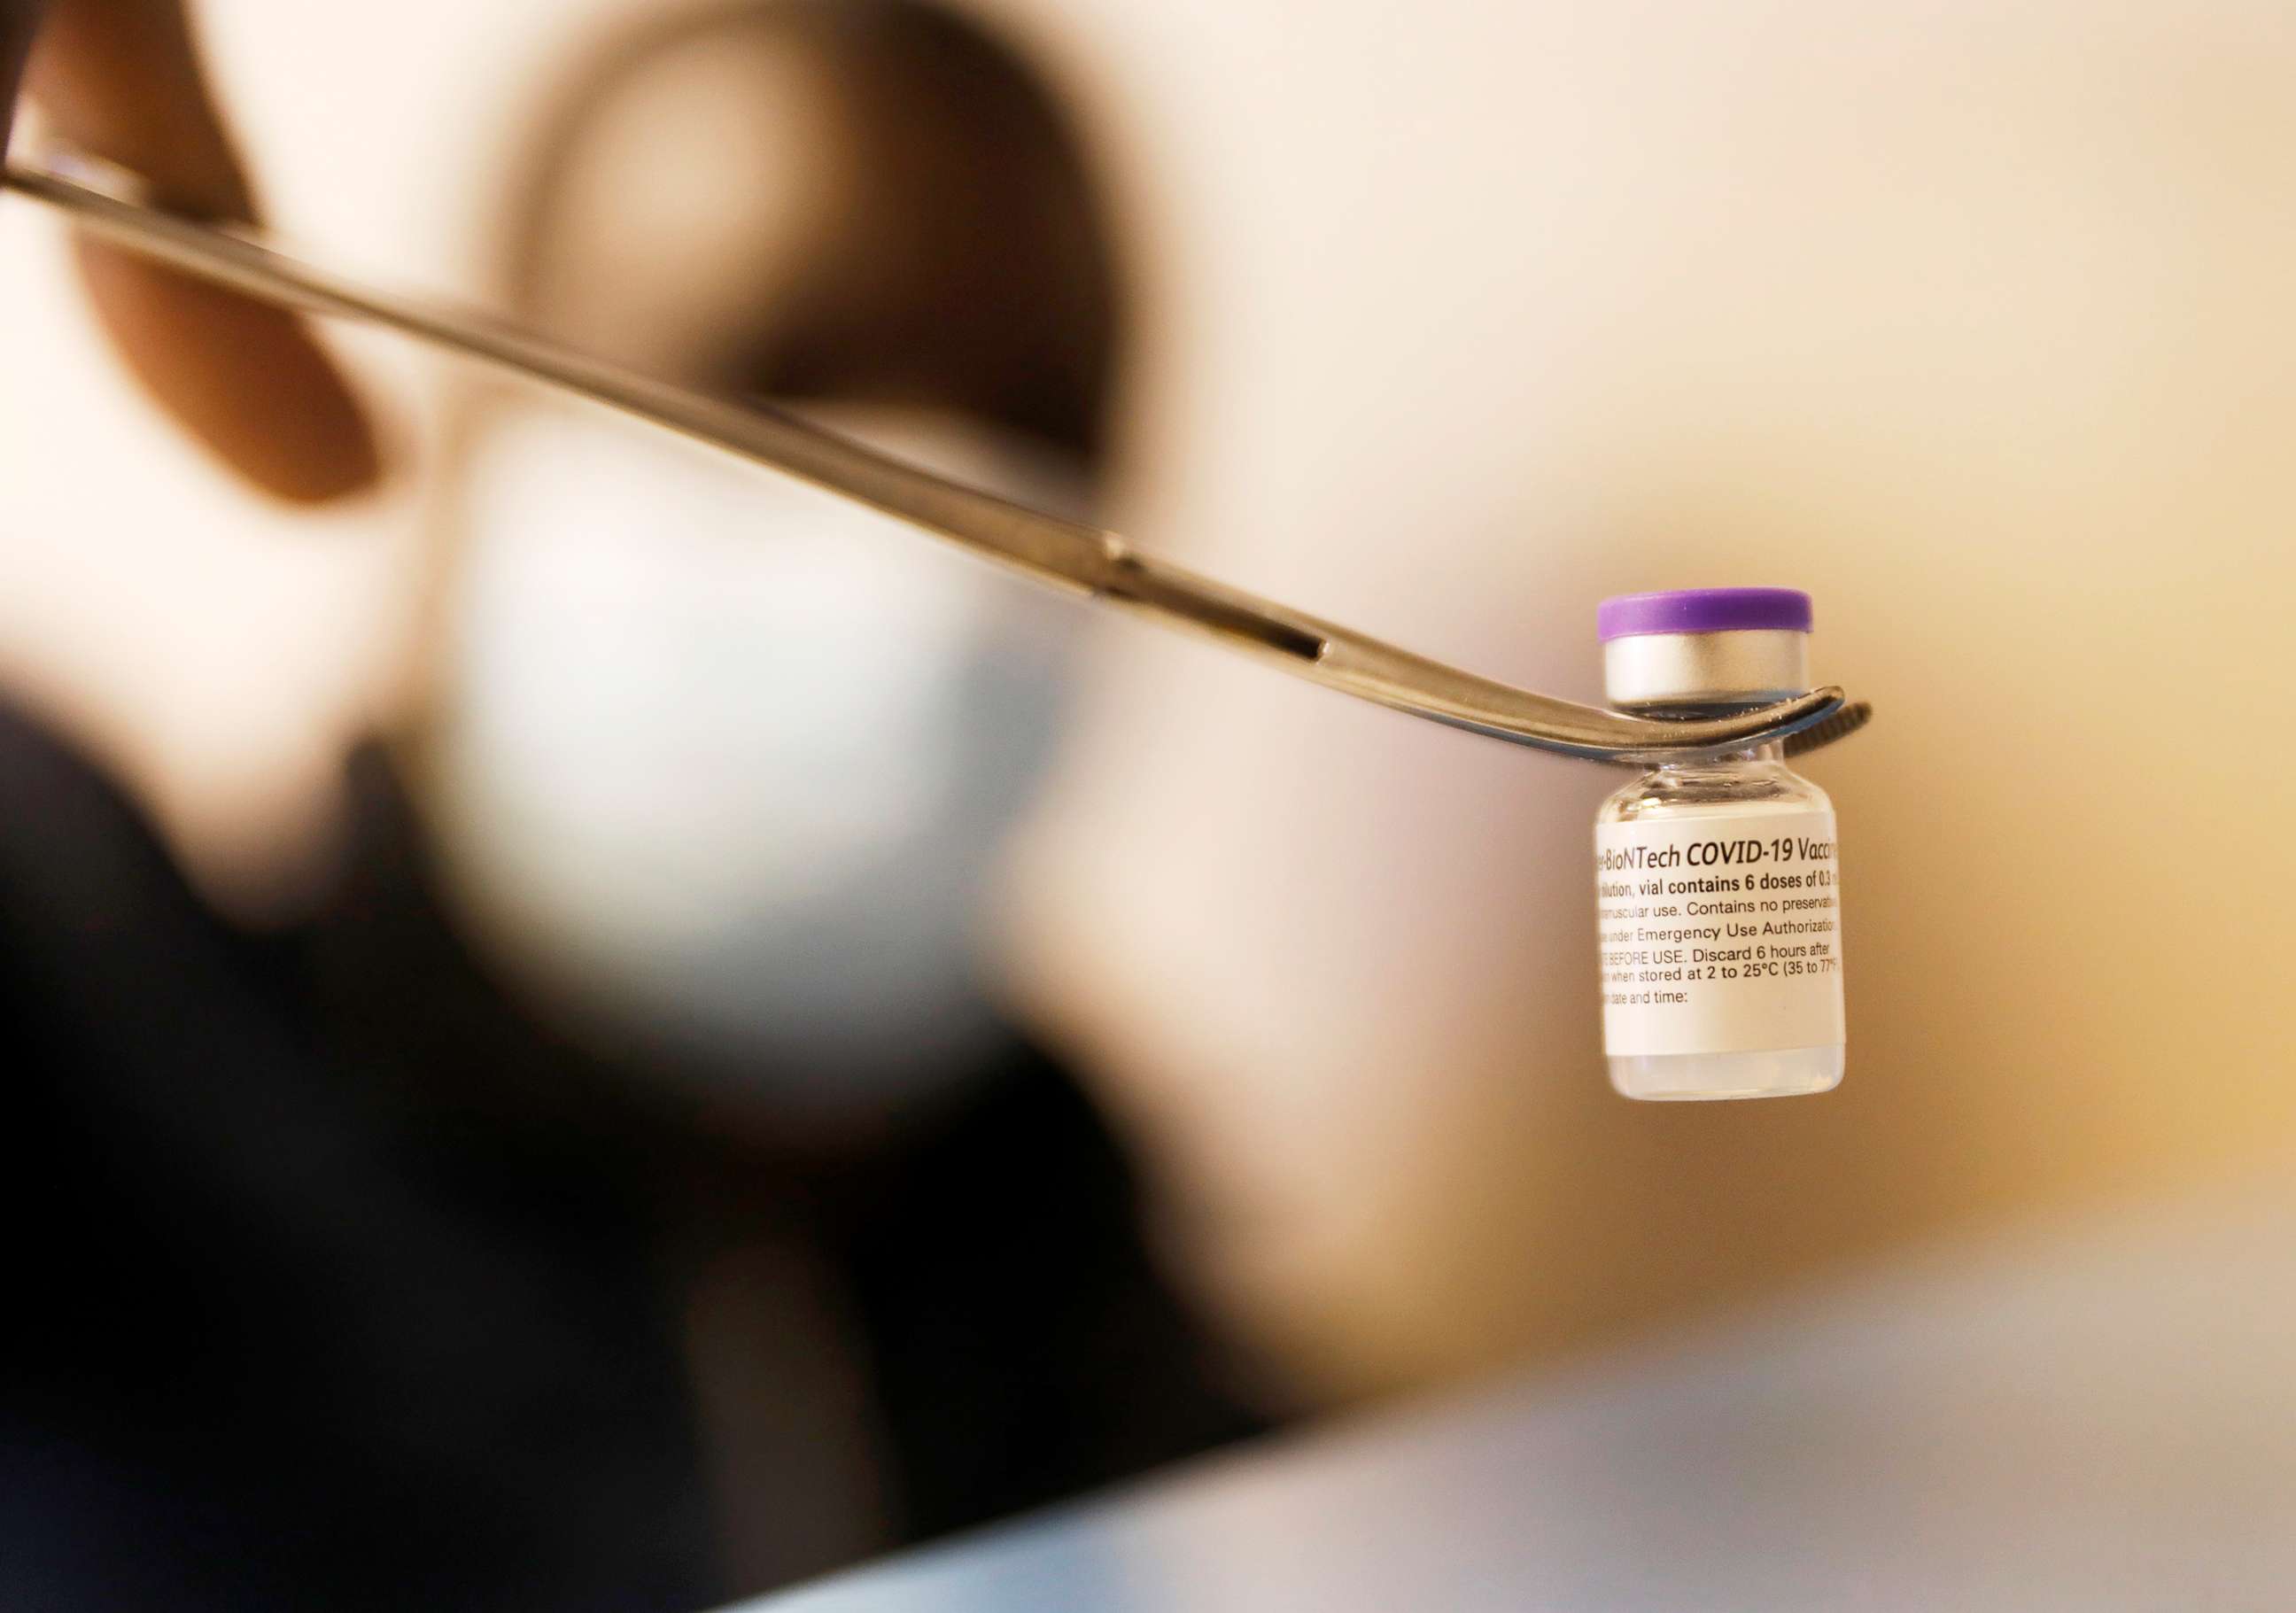 PHOTO: A vial containing roughly 6 doses of the Pfizer COVID-19 vaccine is displayed in Vernon, Calif., March 23, 2021.